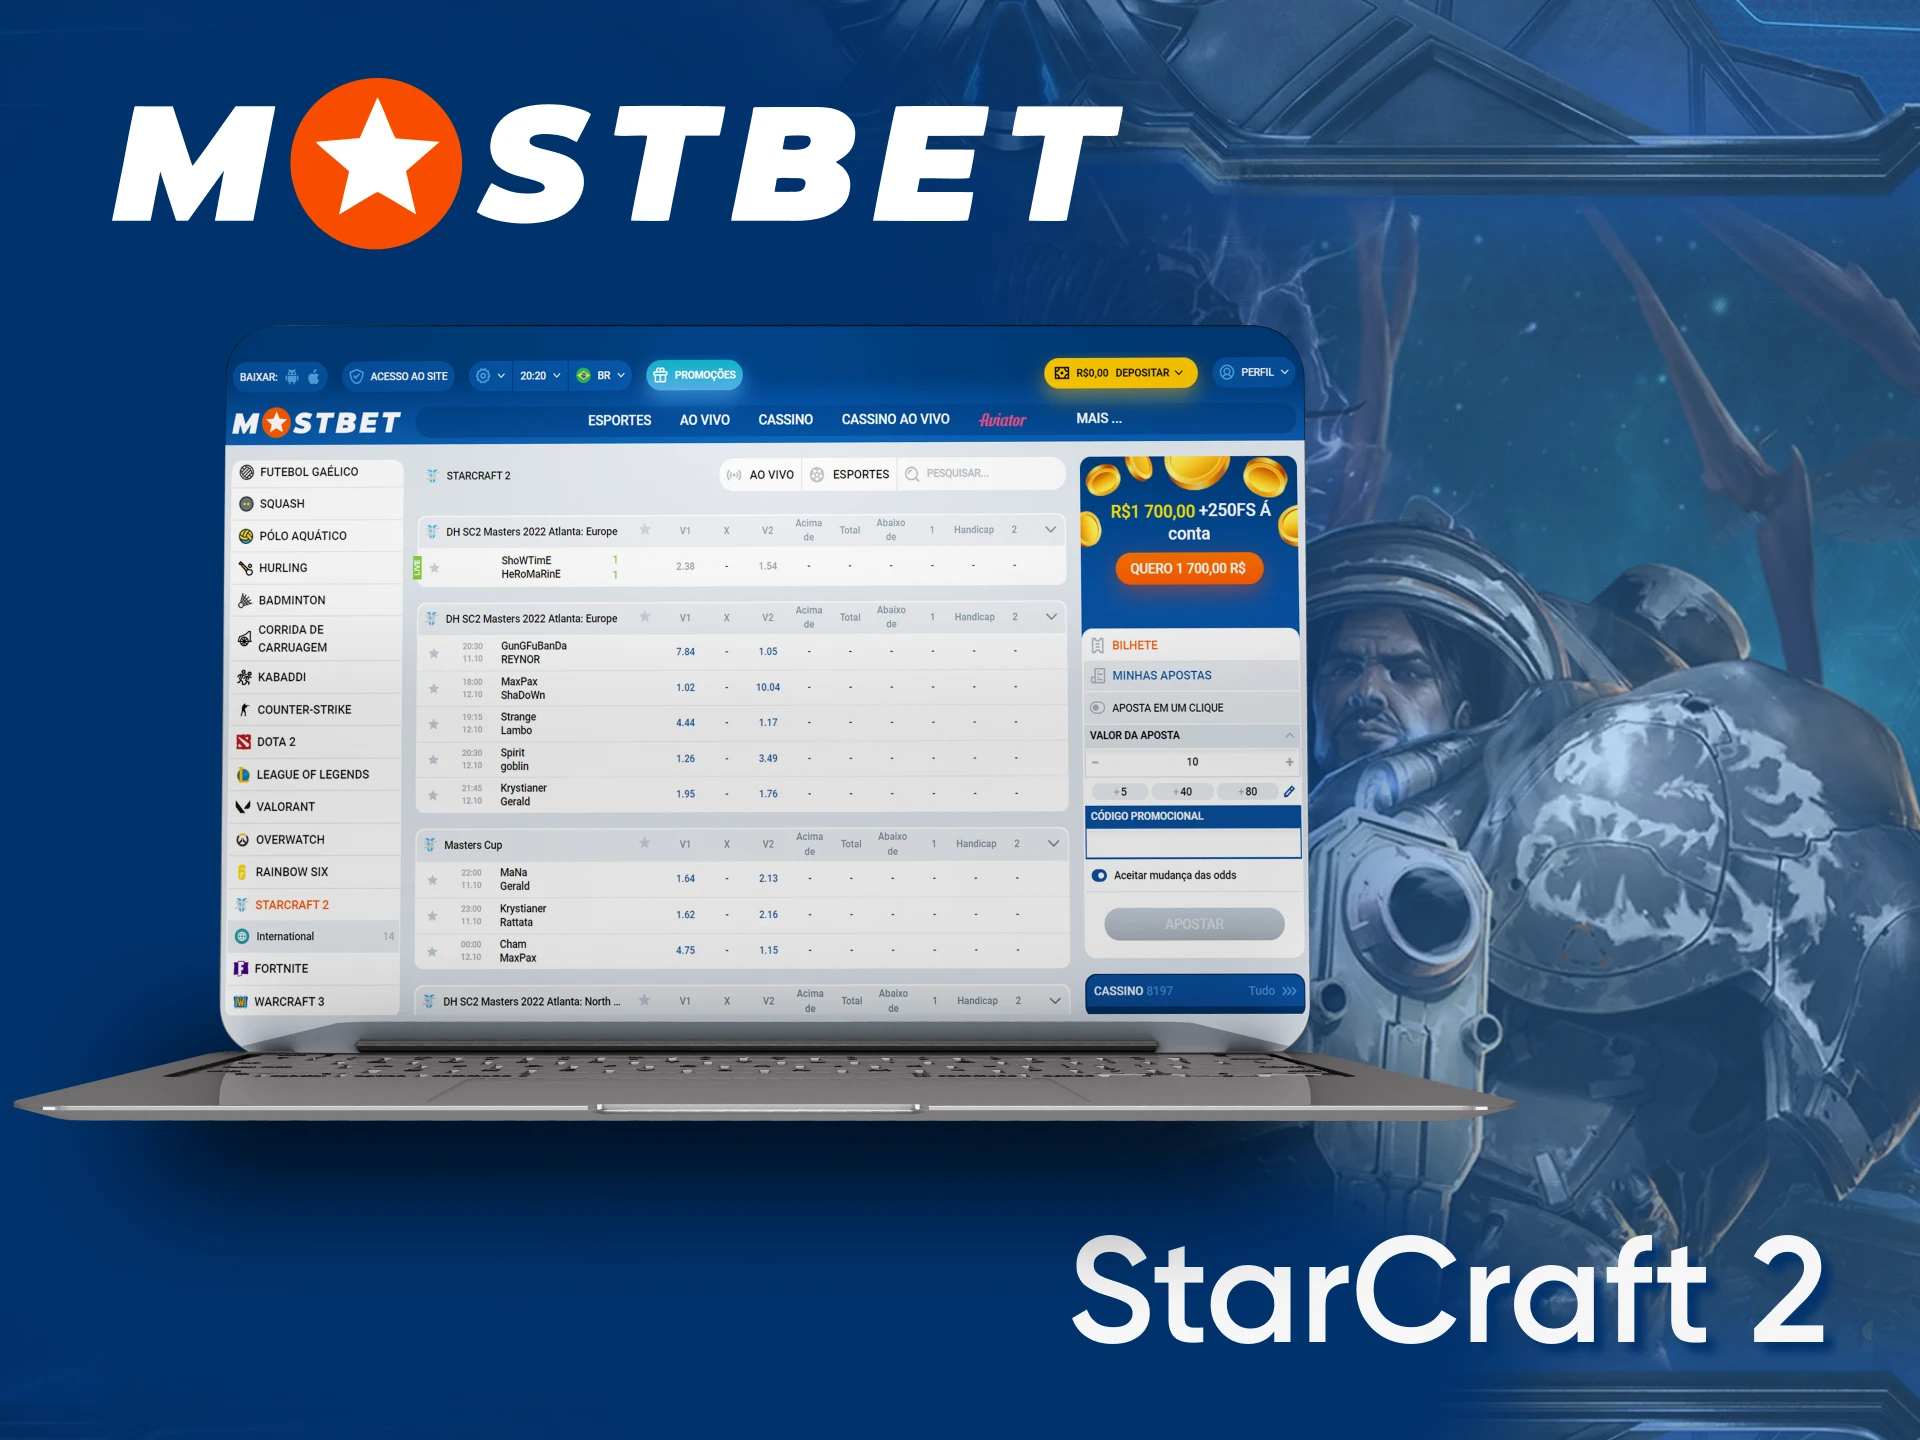 Bet on StarCraft 2 with Mostbet.